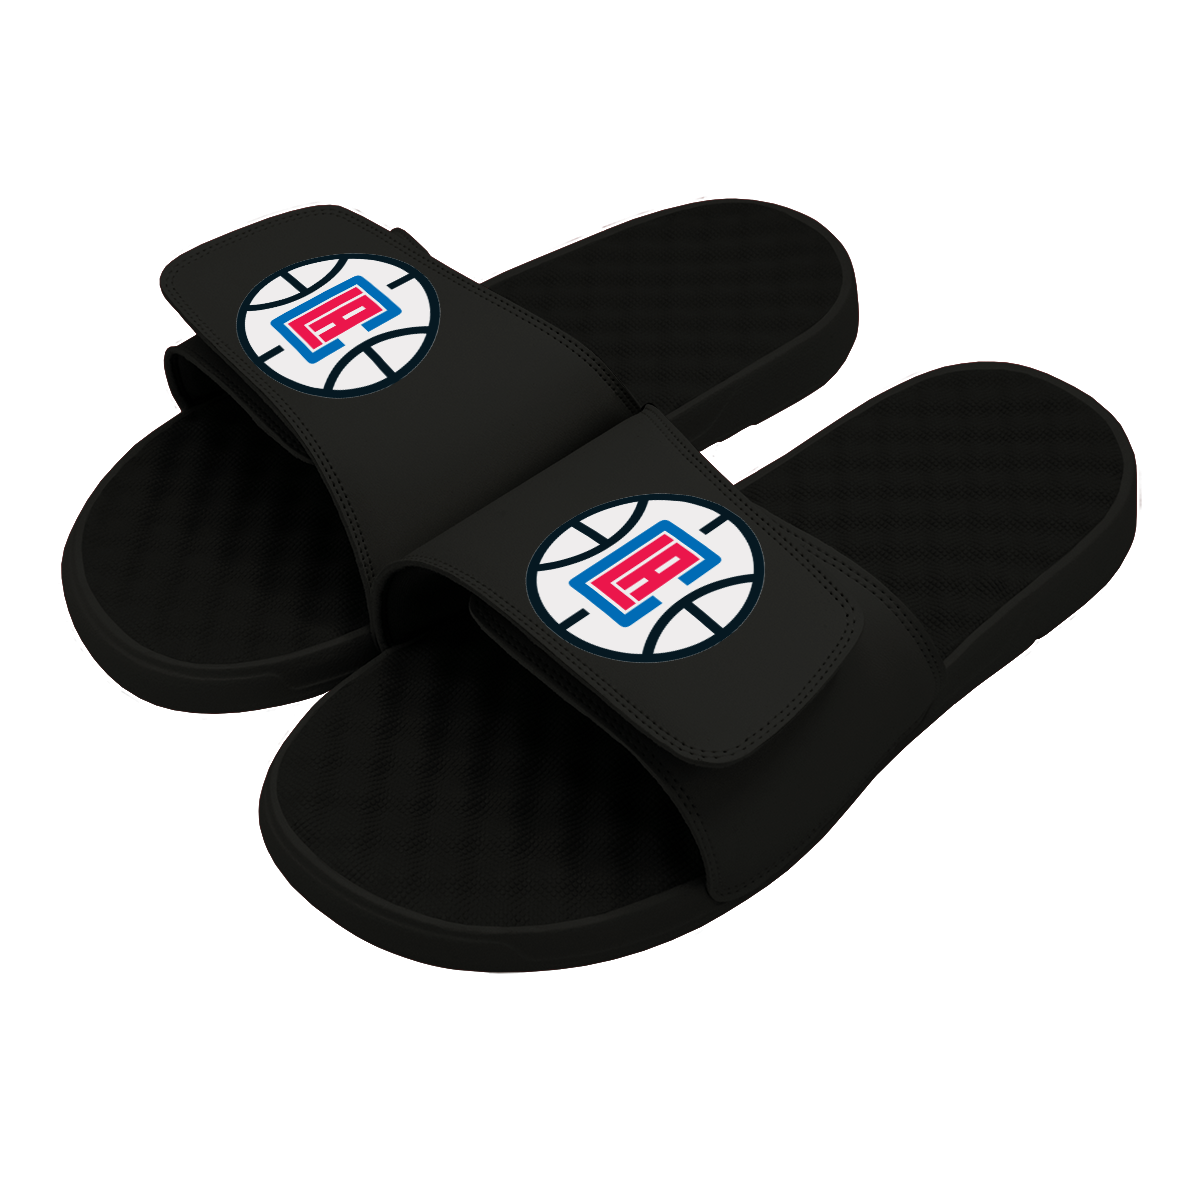 Los Angeles Clippers Primary Slides